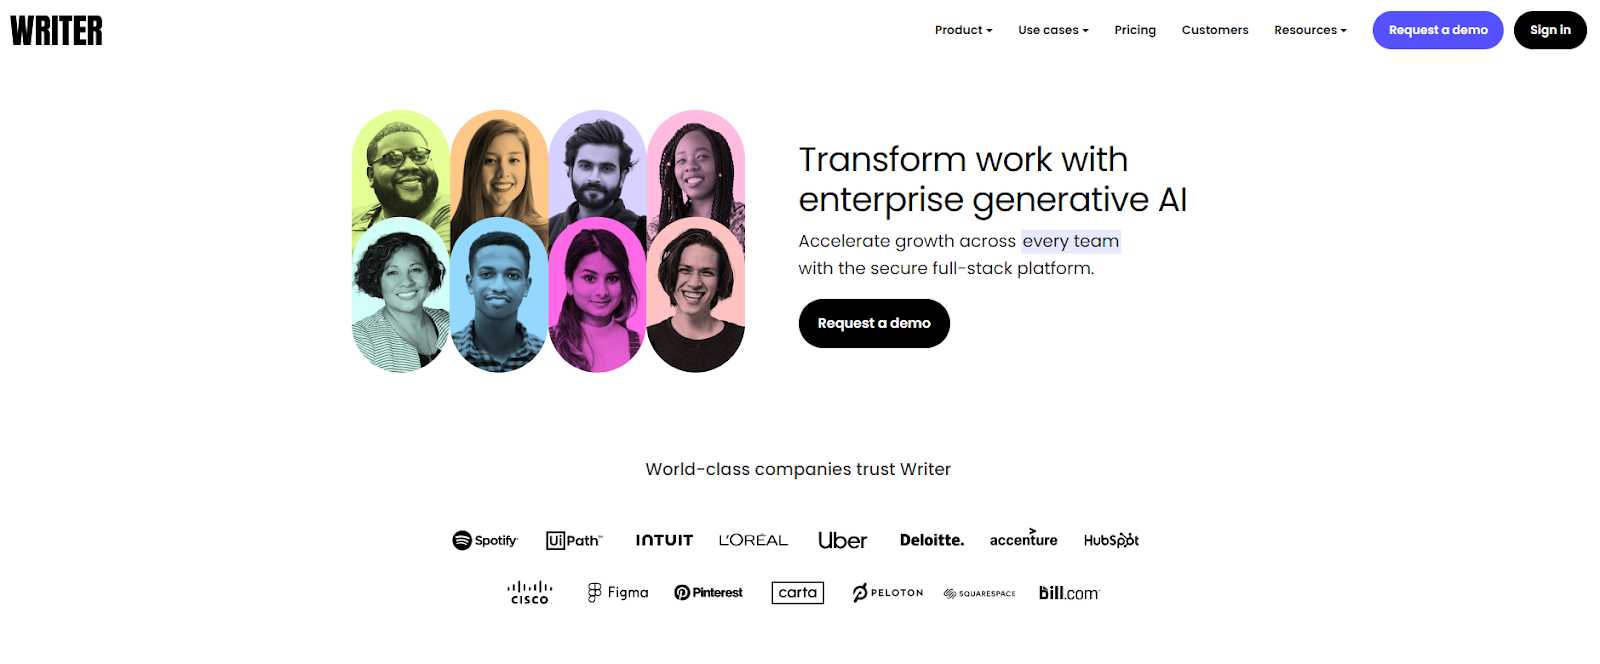 The homepage for the Writer product platform. 